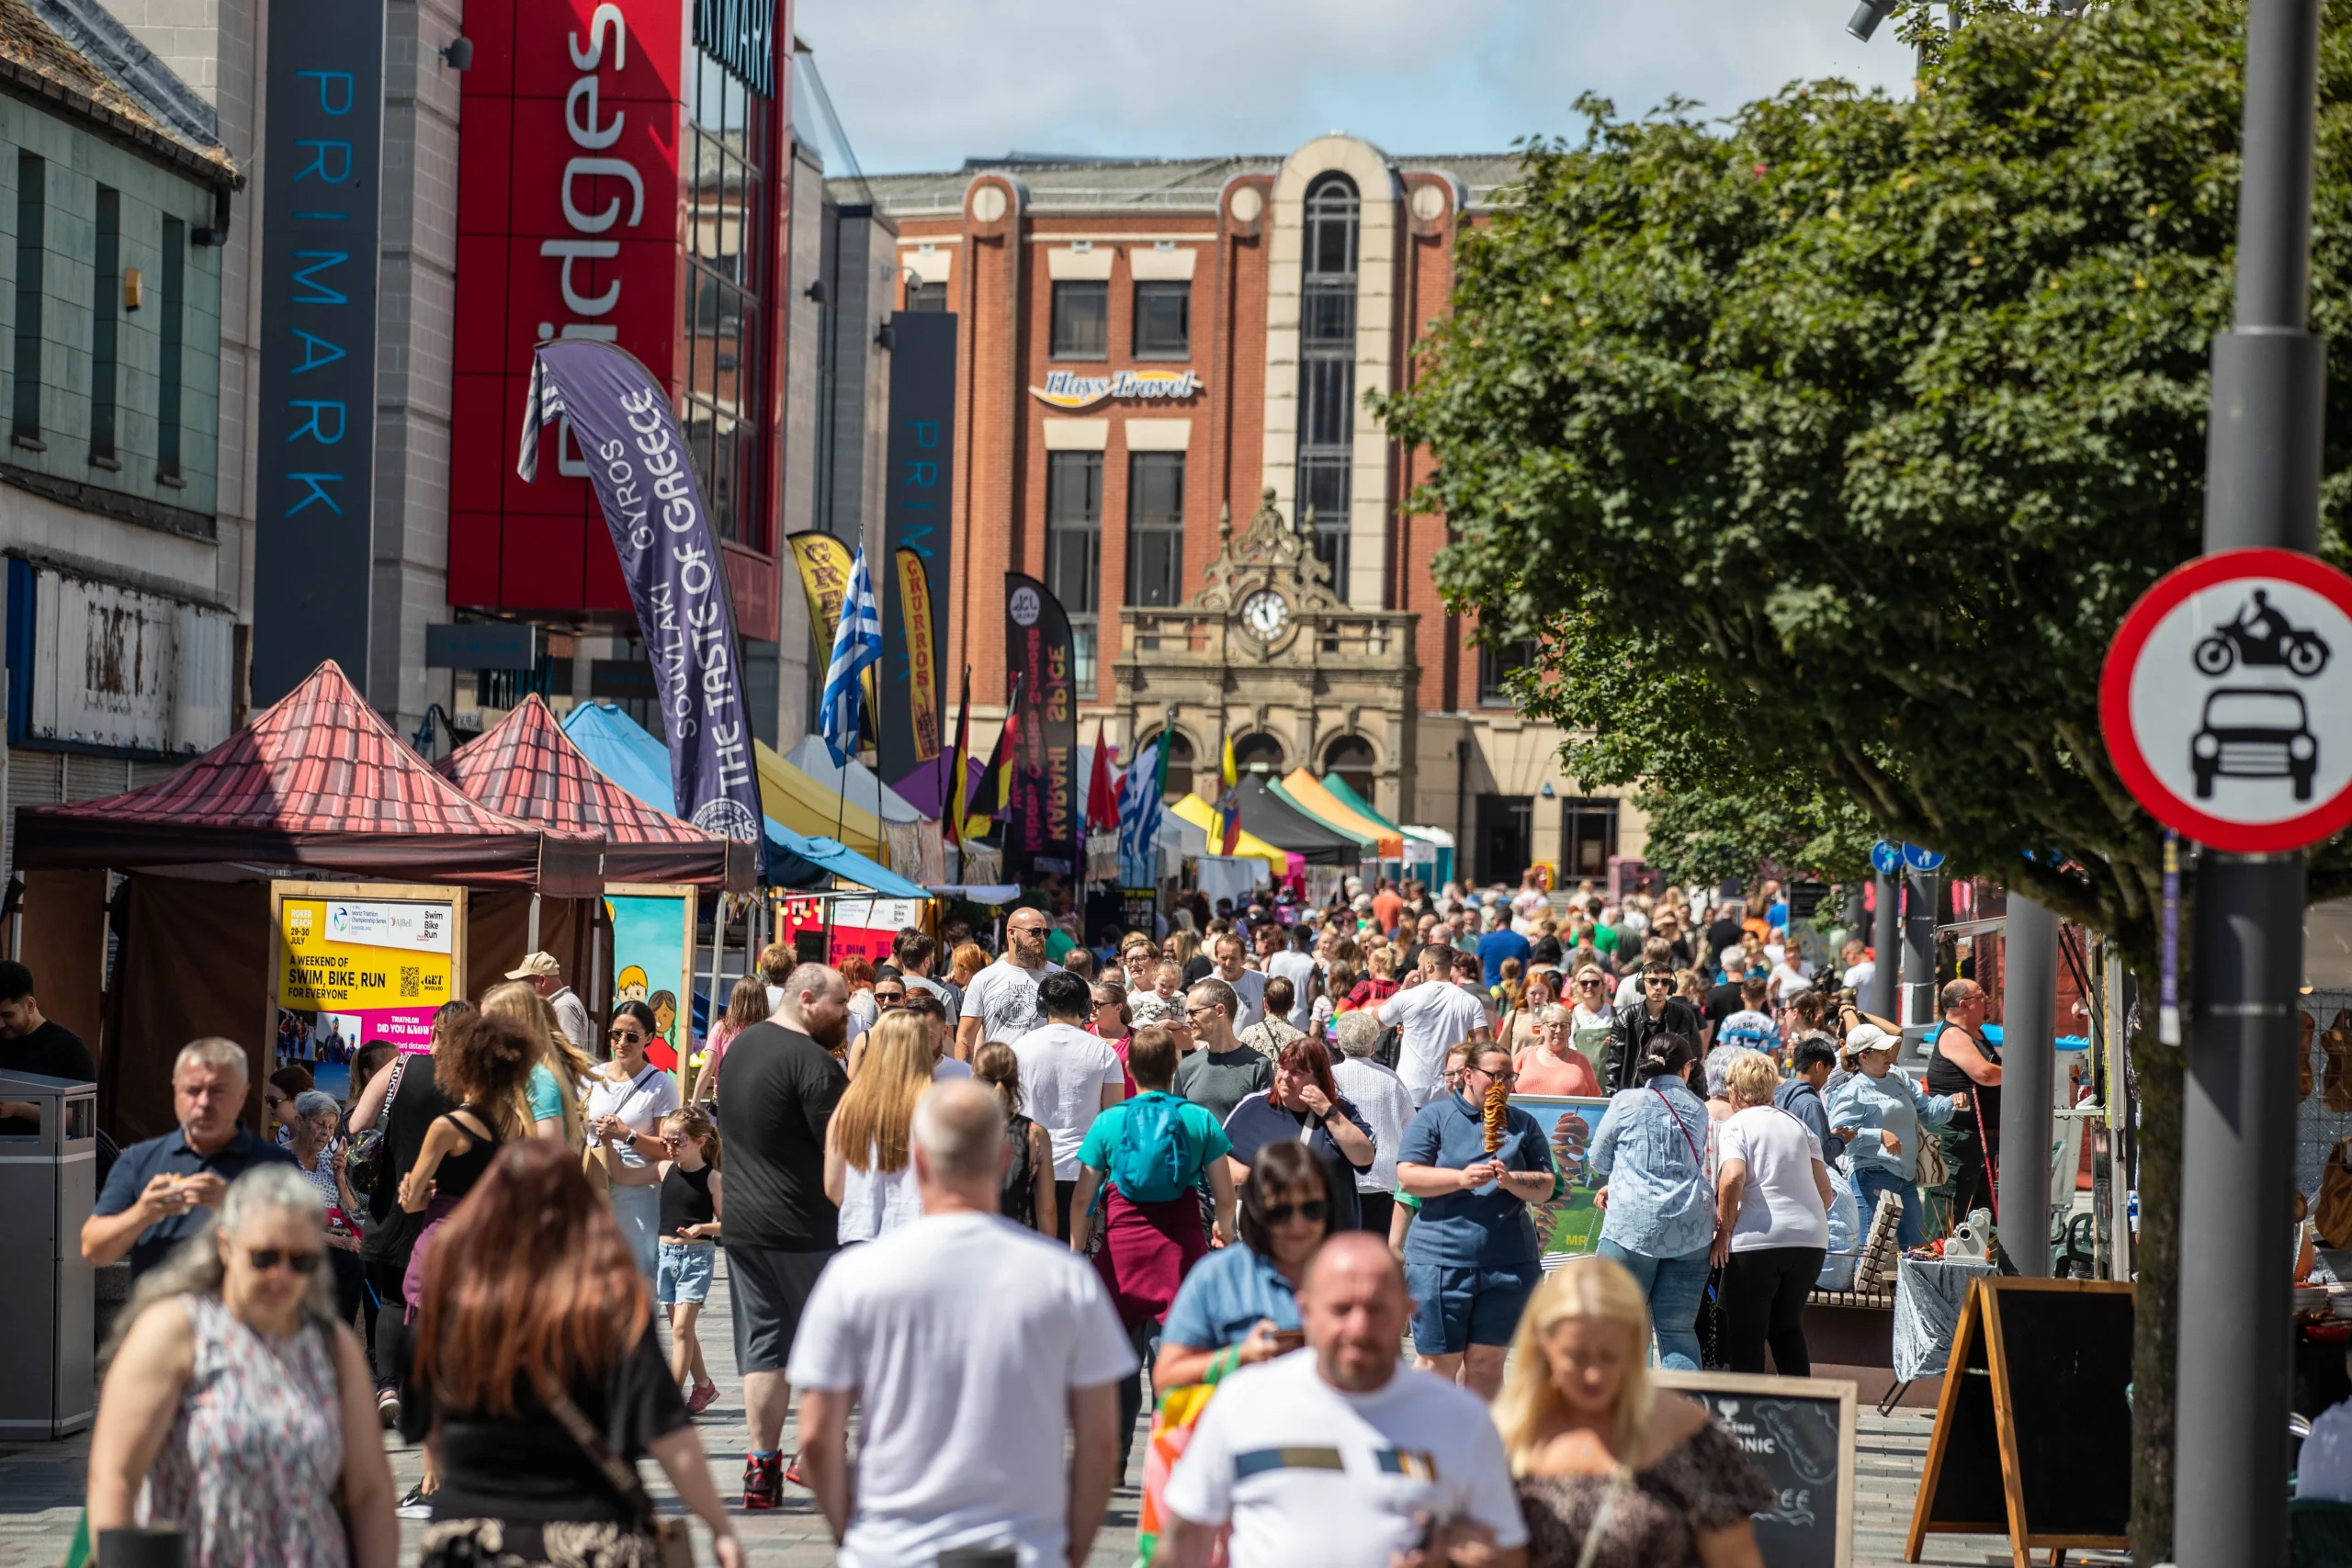 Crowds on High Street West in Sunderland for the Food and Drink Festival